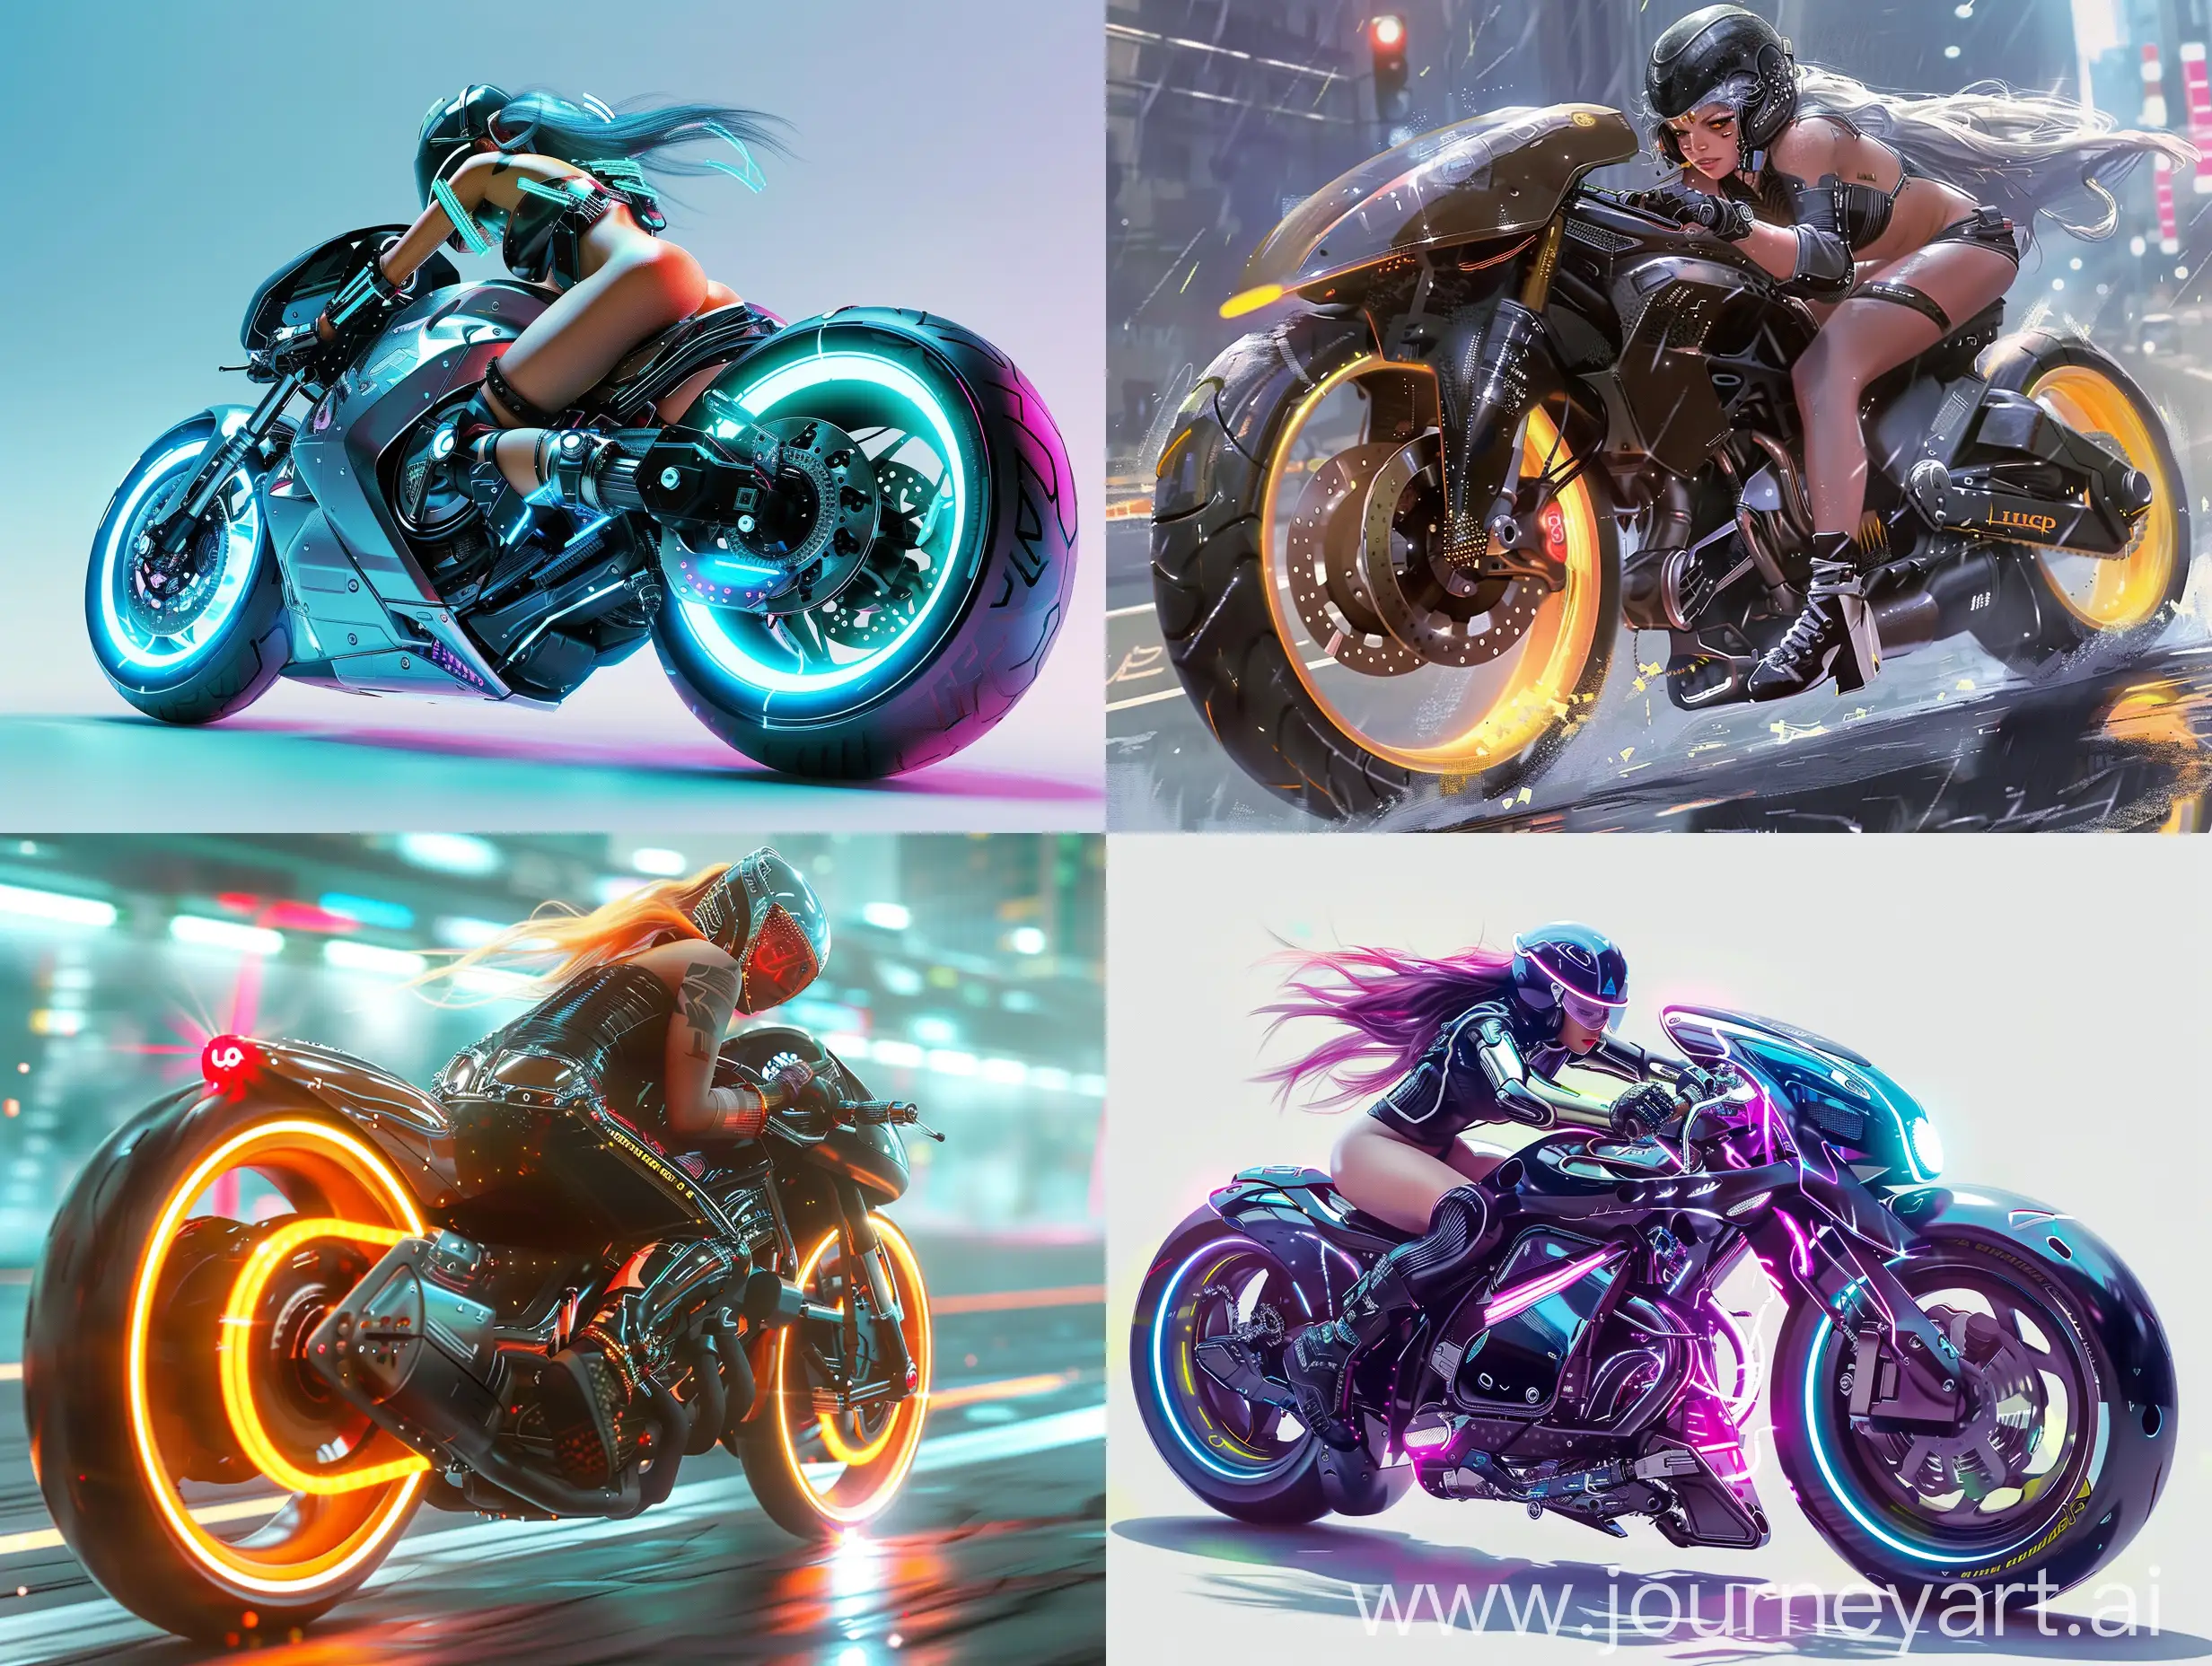 beautiful girl rides a motorcycle in cyberpunk stylebeautiful girl rides a motorcycle in cyberpunk style